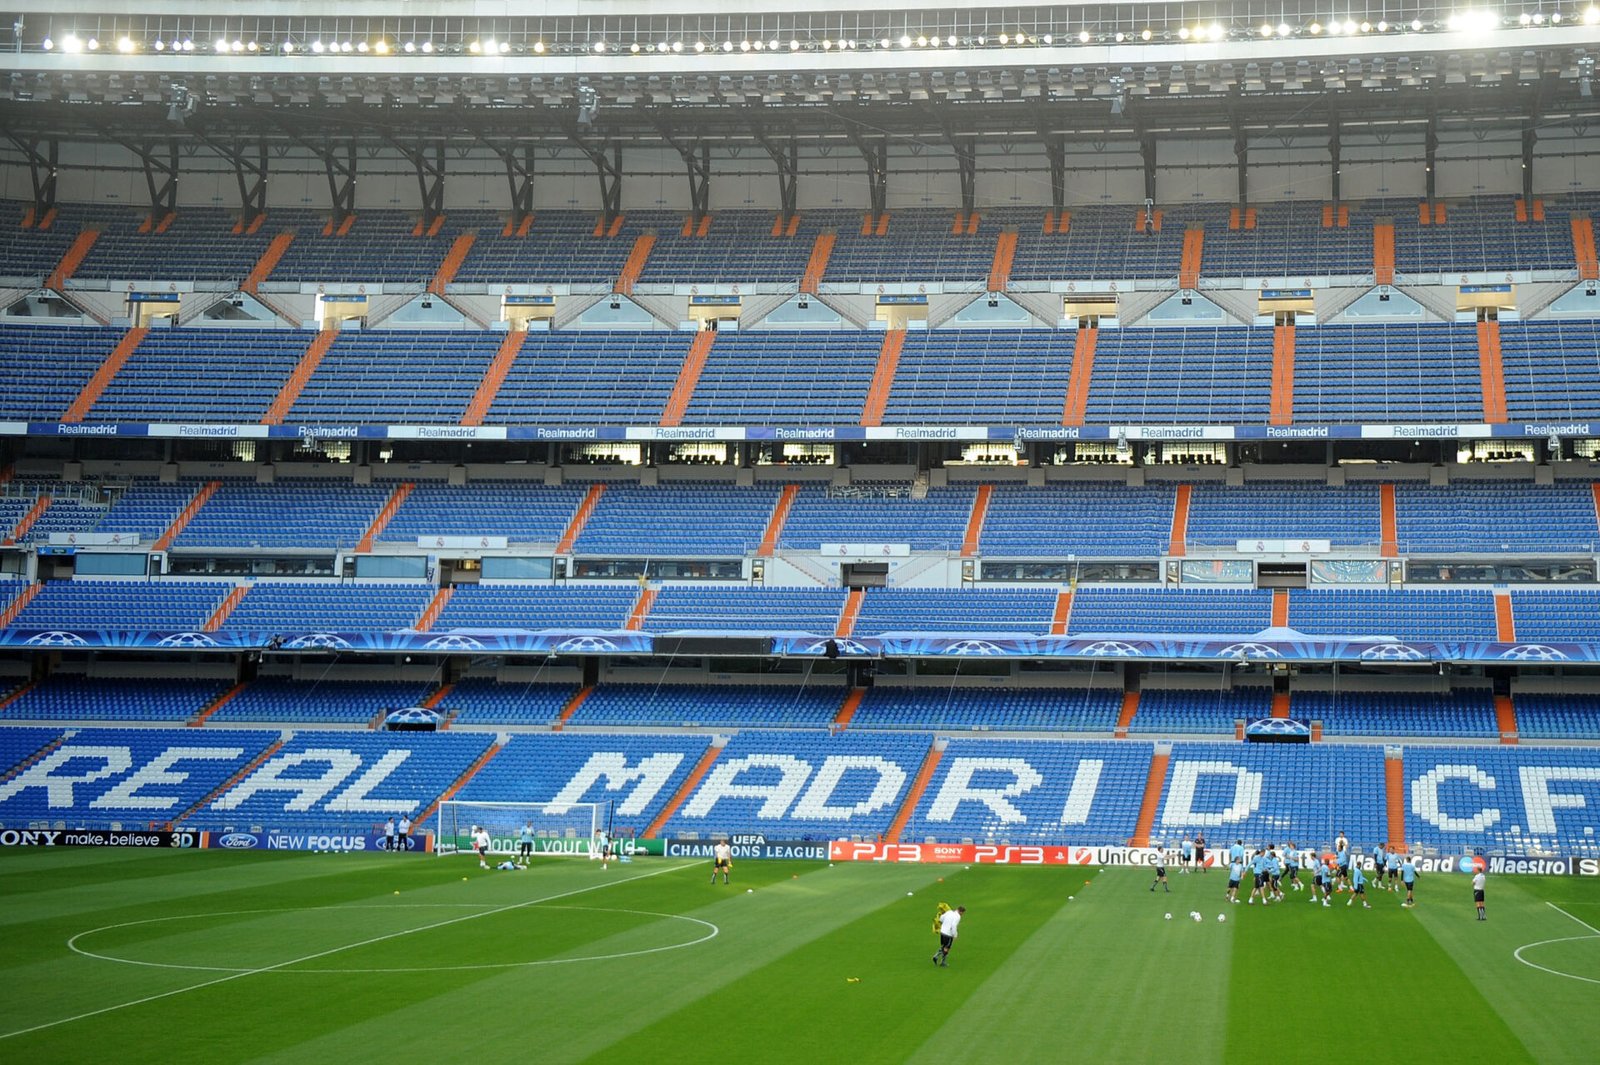 The Santiago Bernabéu steps to 75 years, get a look at its massive evolution